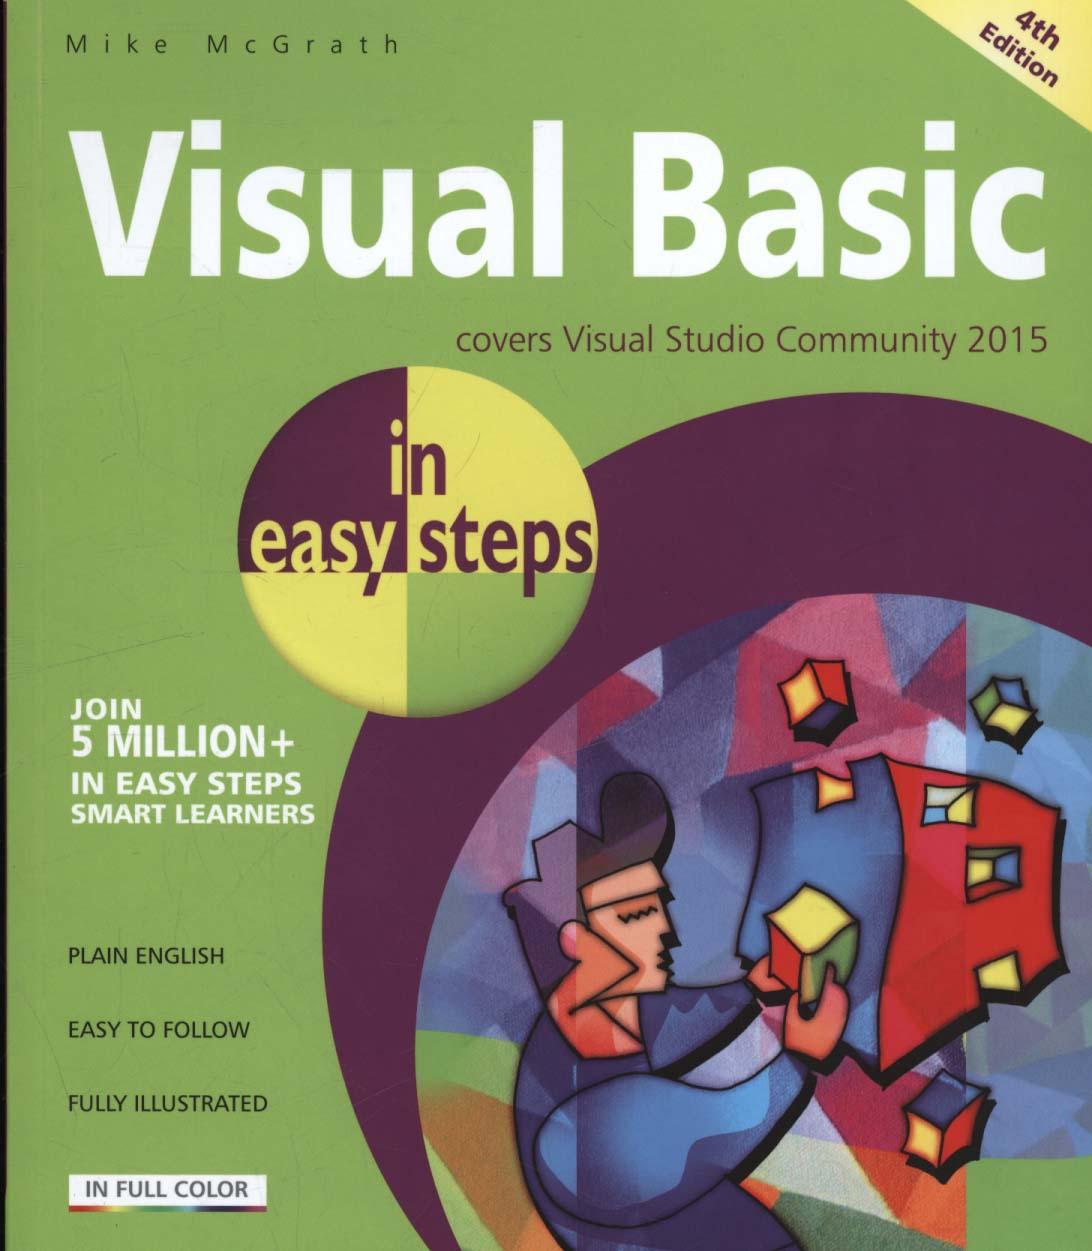 Visual Basic in easy steps - Mike McGrath